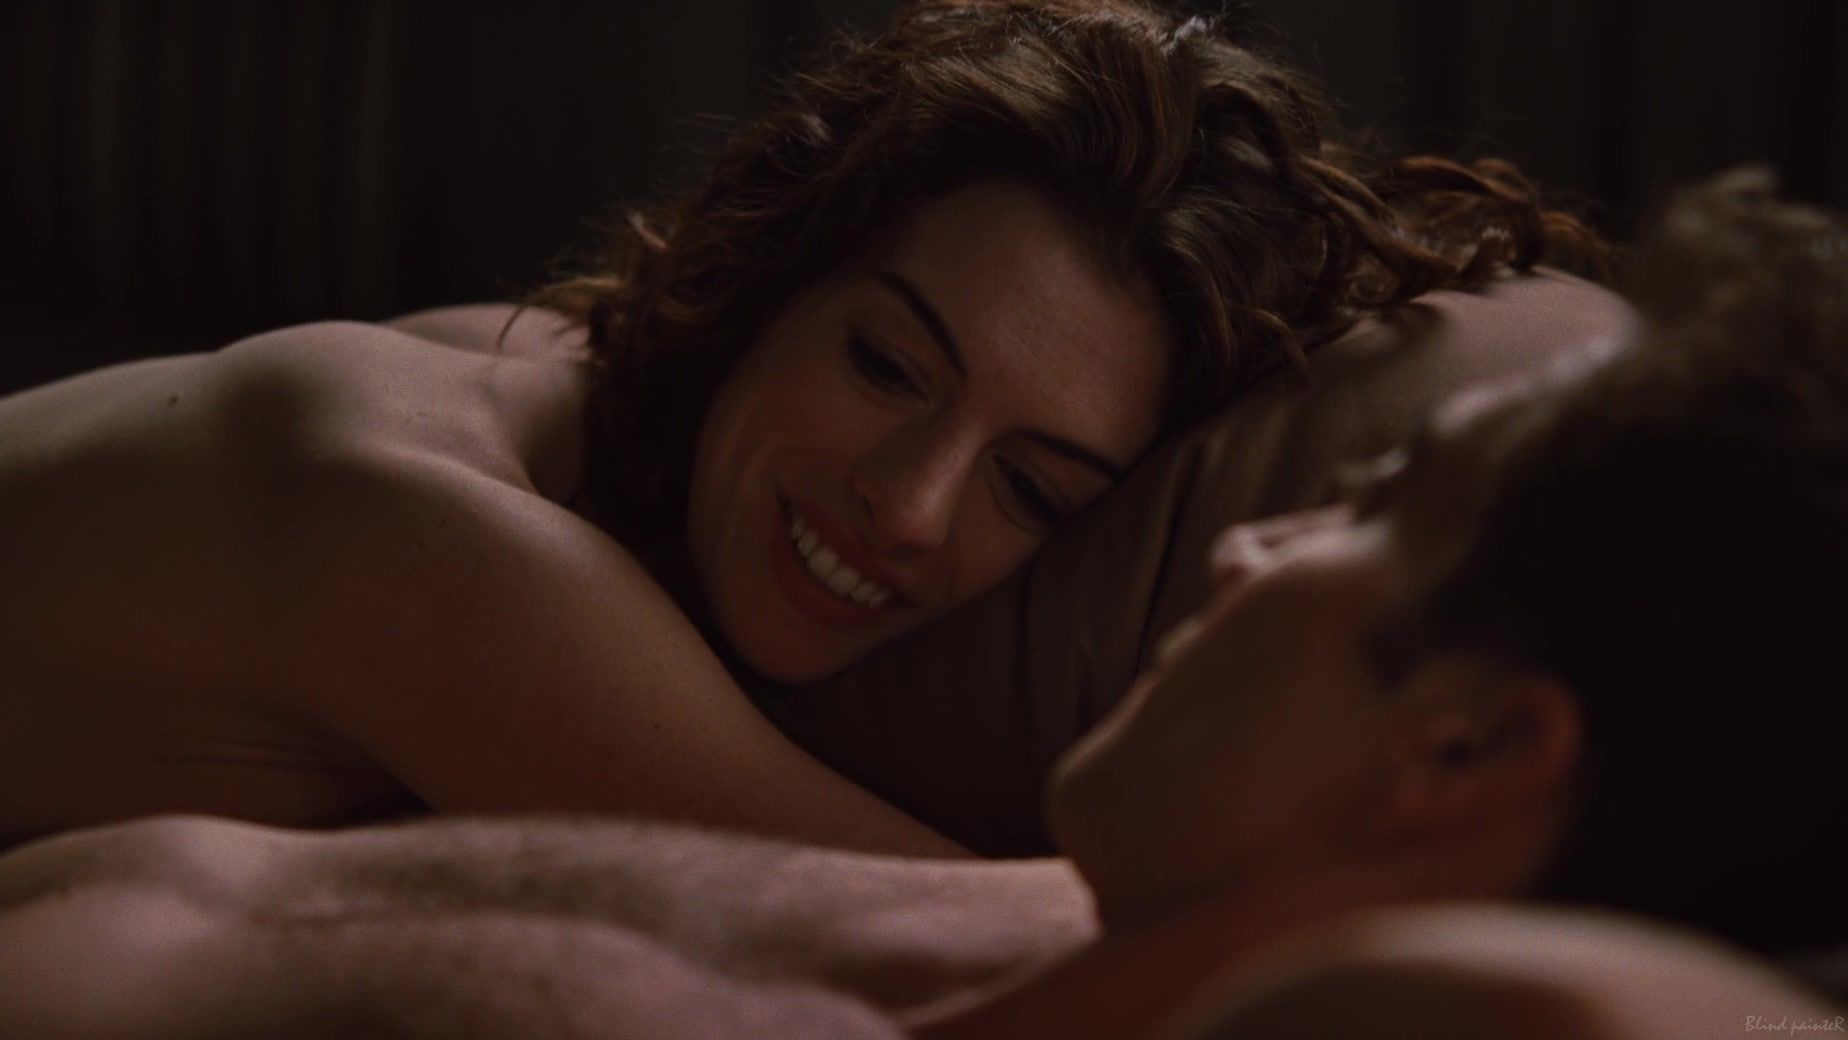 Exgf Anne Hathaway nude - Love and Other Drugs (2010) Fantasy Massage